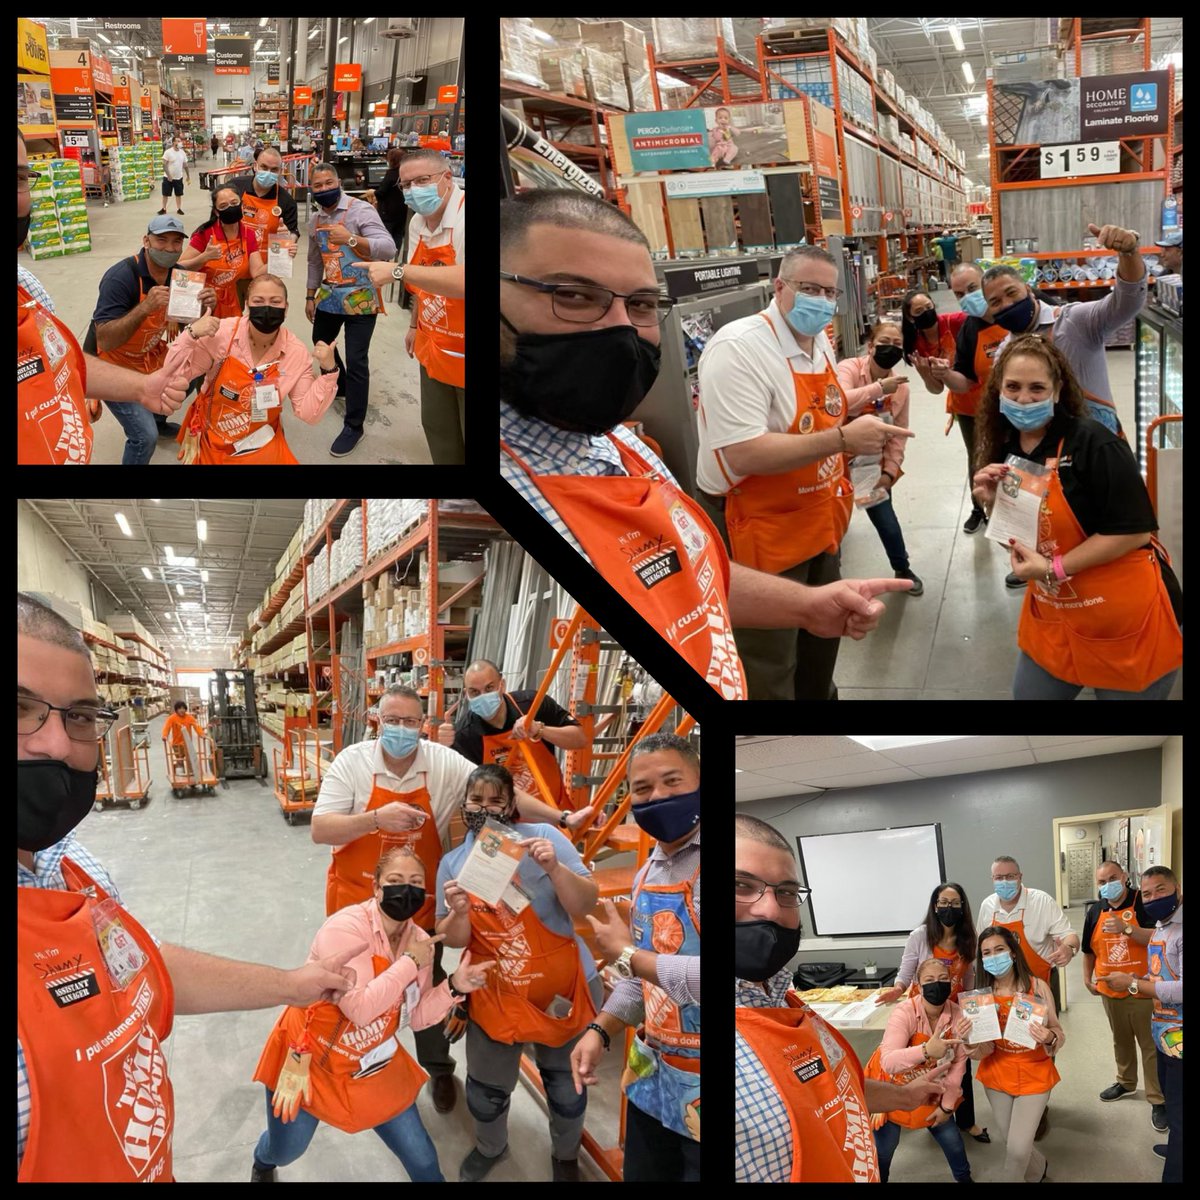 Thank you @JoeRSantelia for the visit to 0202 today!!! Great day Full of recognition. Our Hialeah 0202 team Rocks!!! @wcork19 @Erika_AR_HD @sammyHD_0202